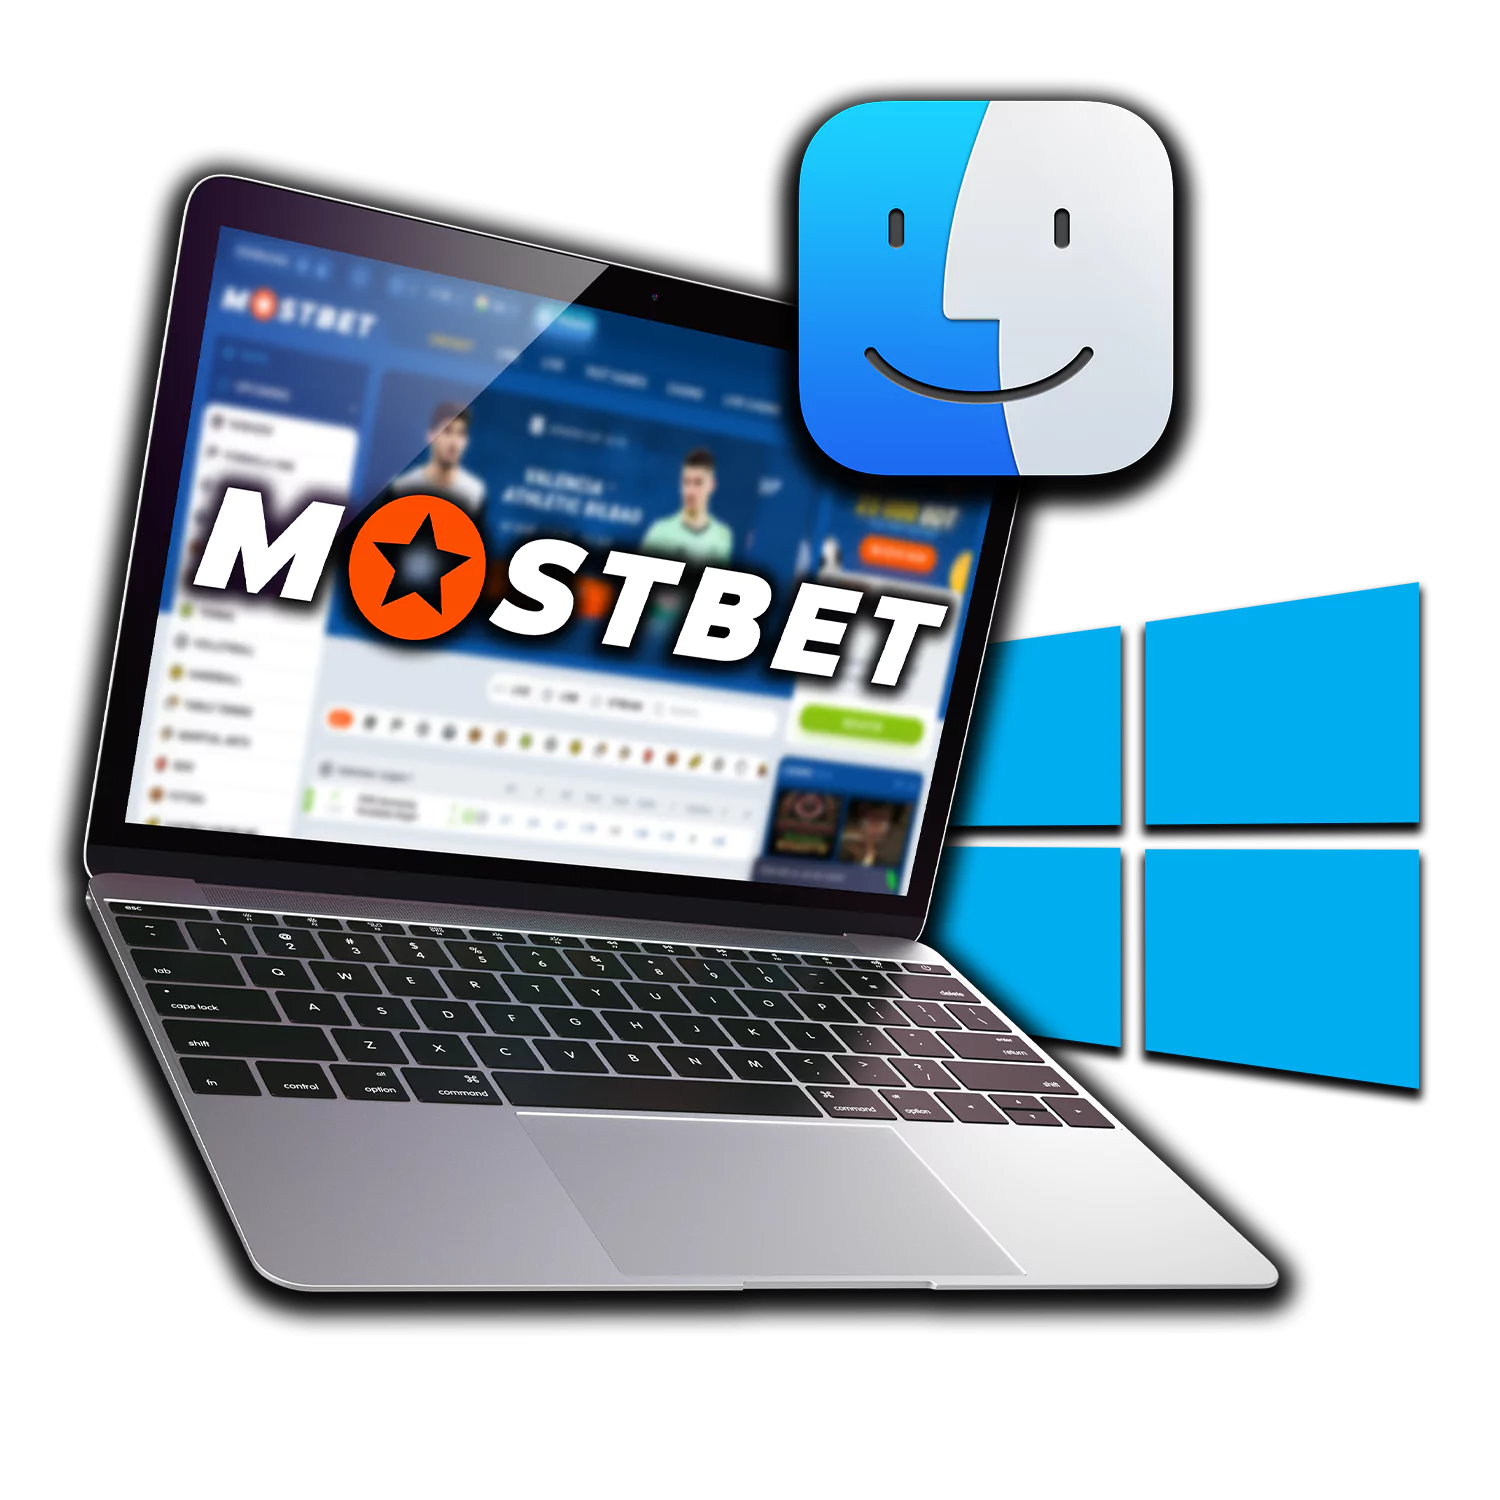 Mostbet PC client for windows and Mac OS.